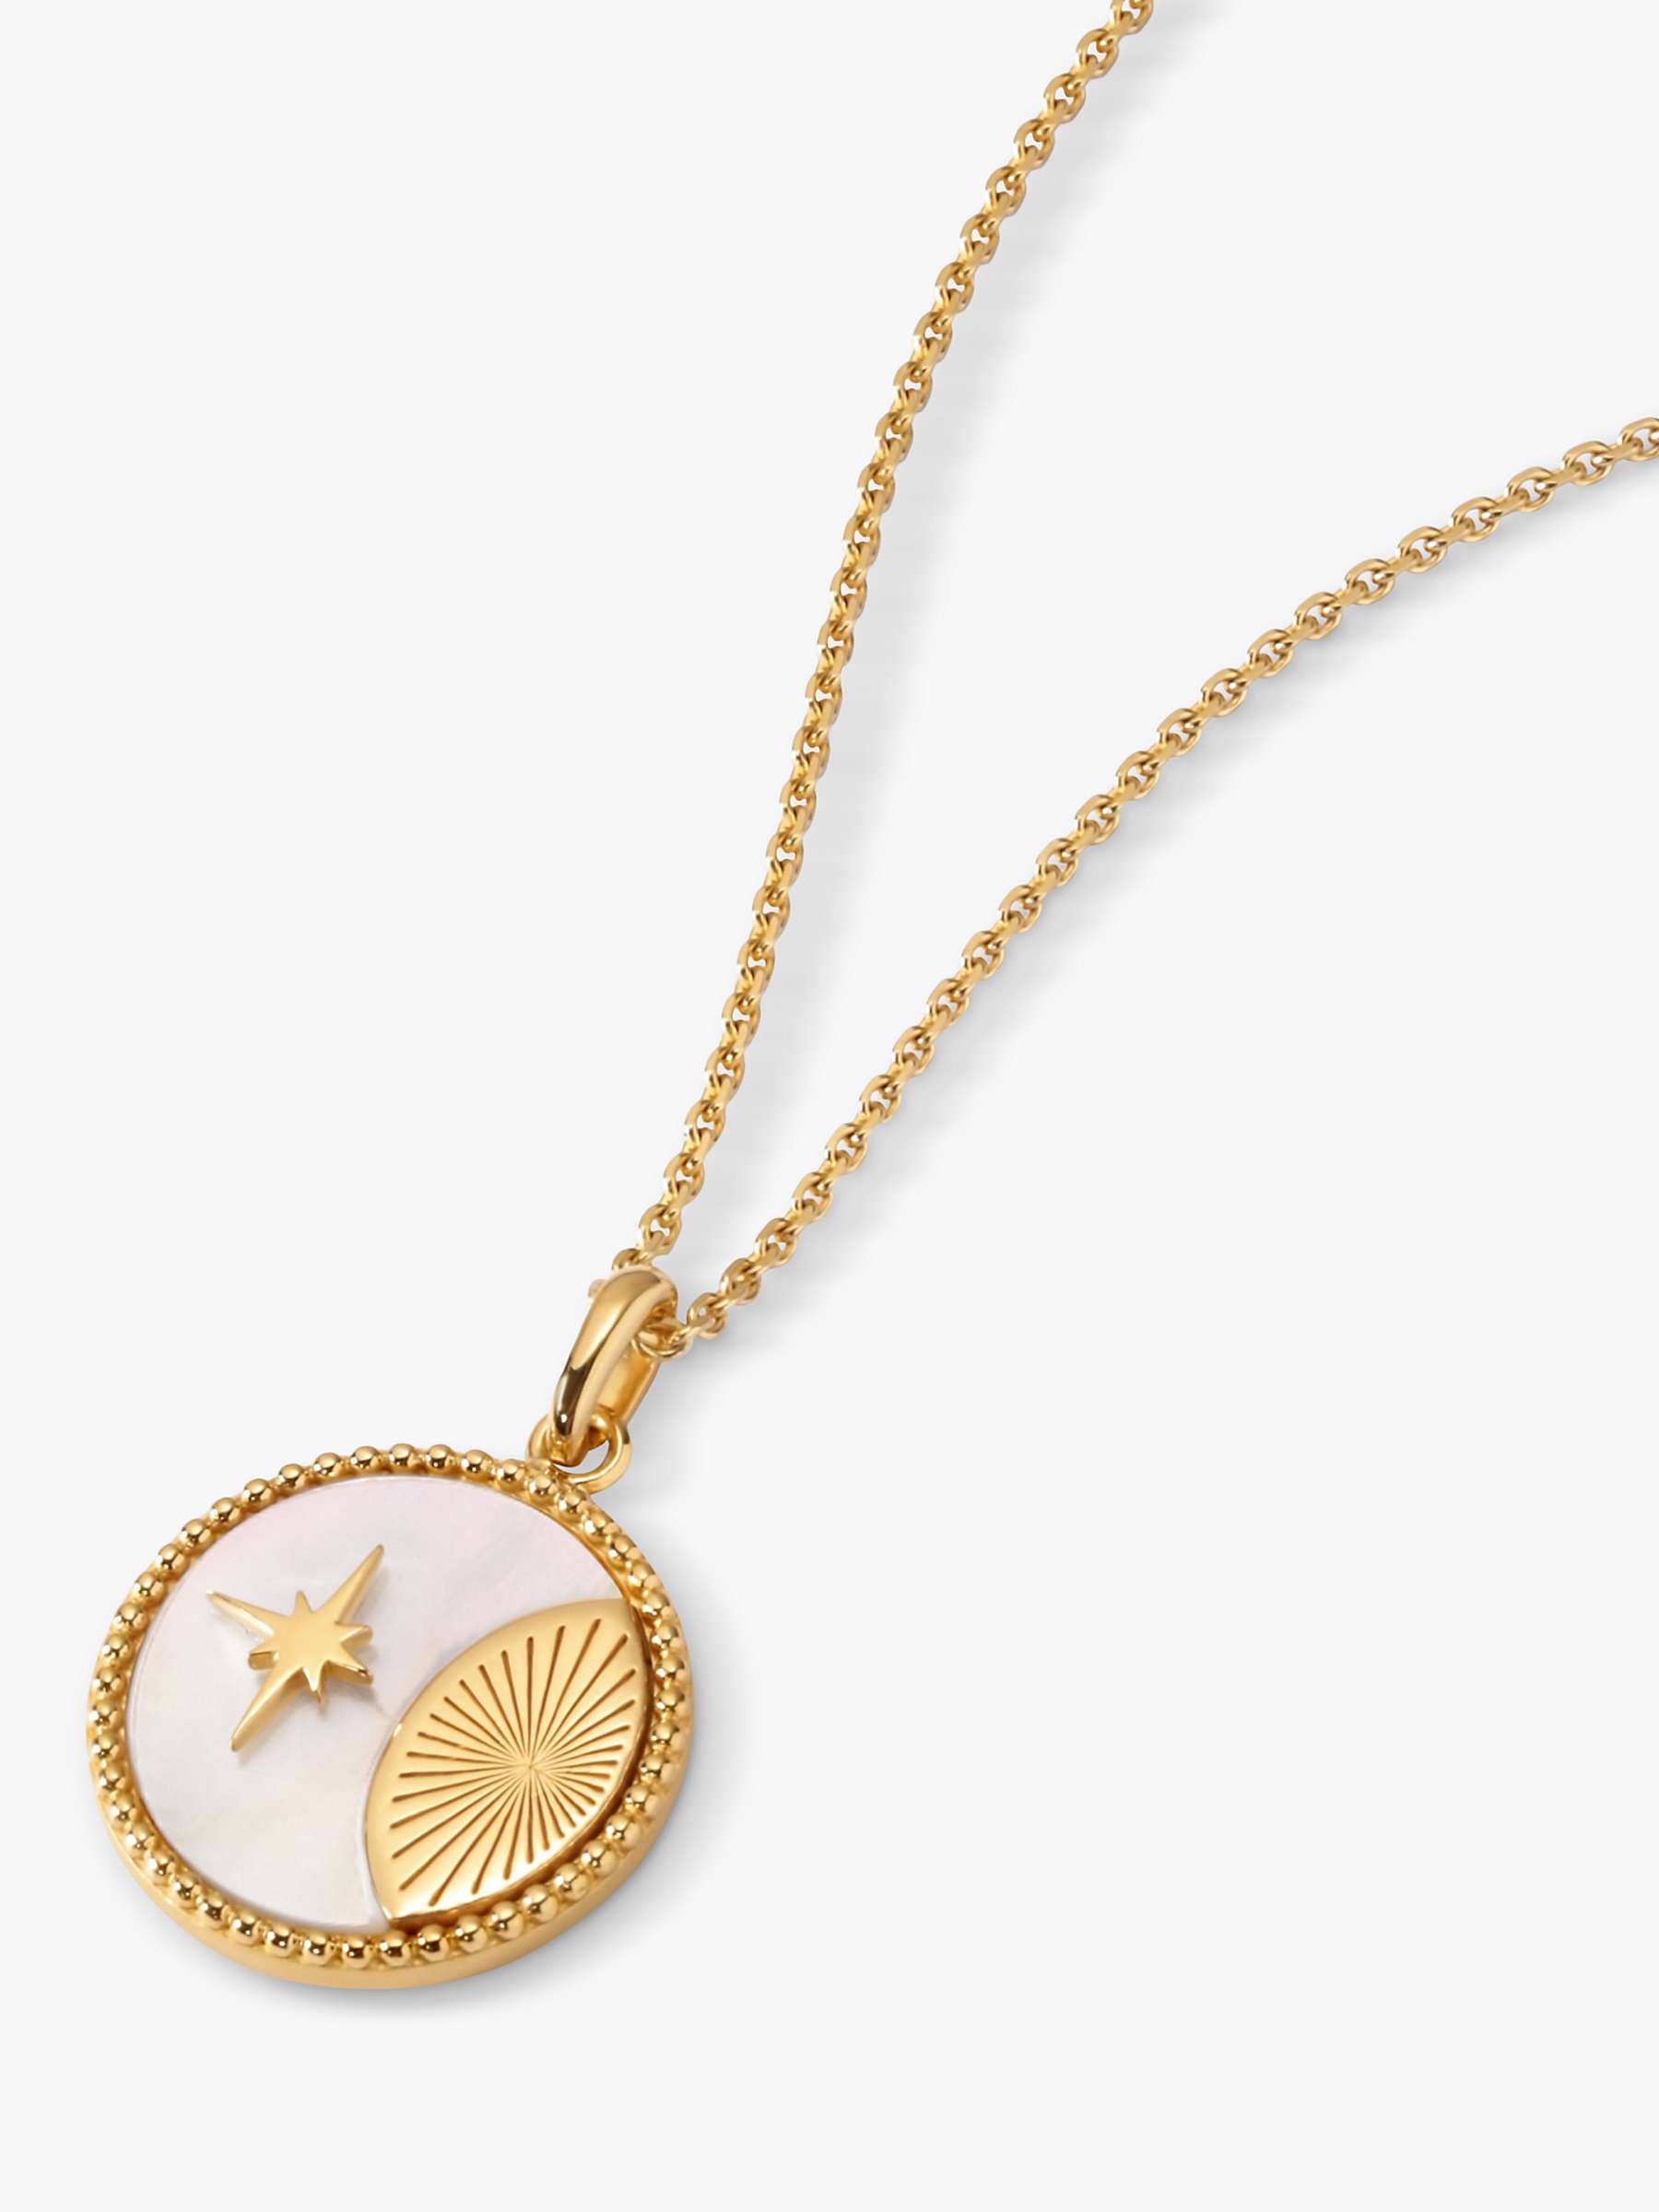 Buy Edge of Ember Solar Mother of Pearl Coin Pendant Necklace Online at johnlewis.com